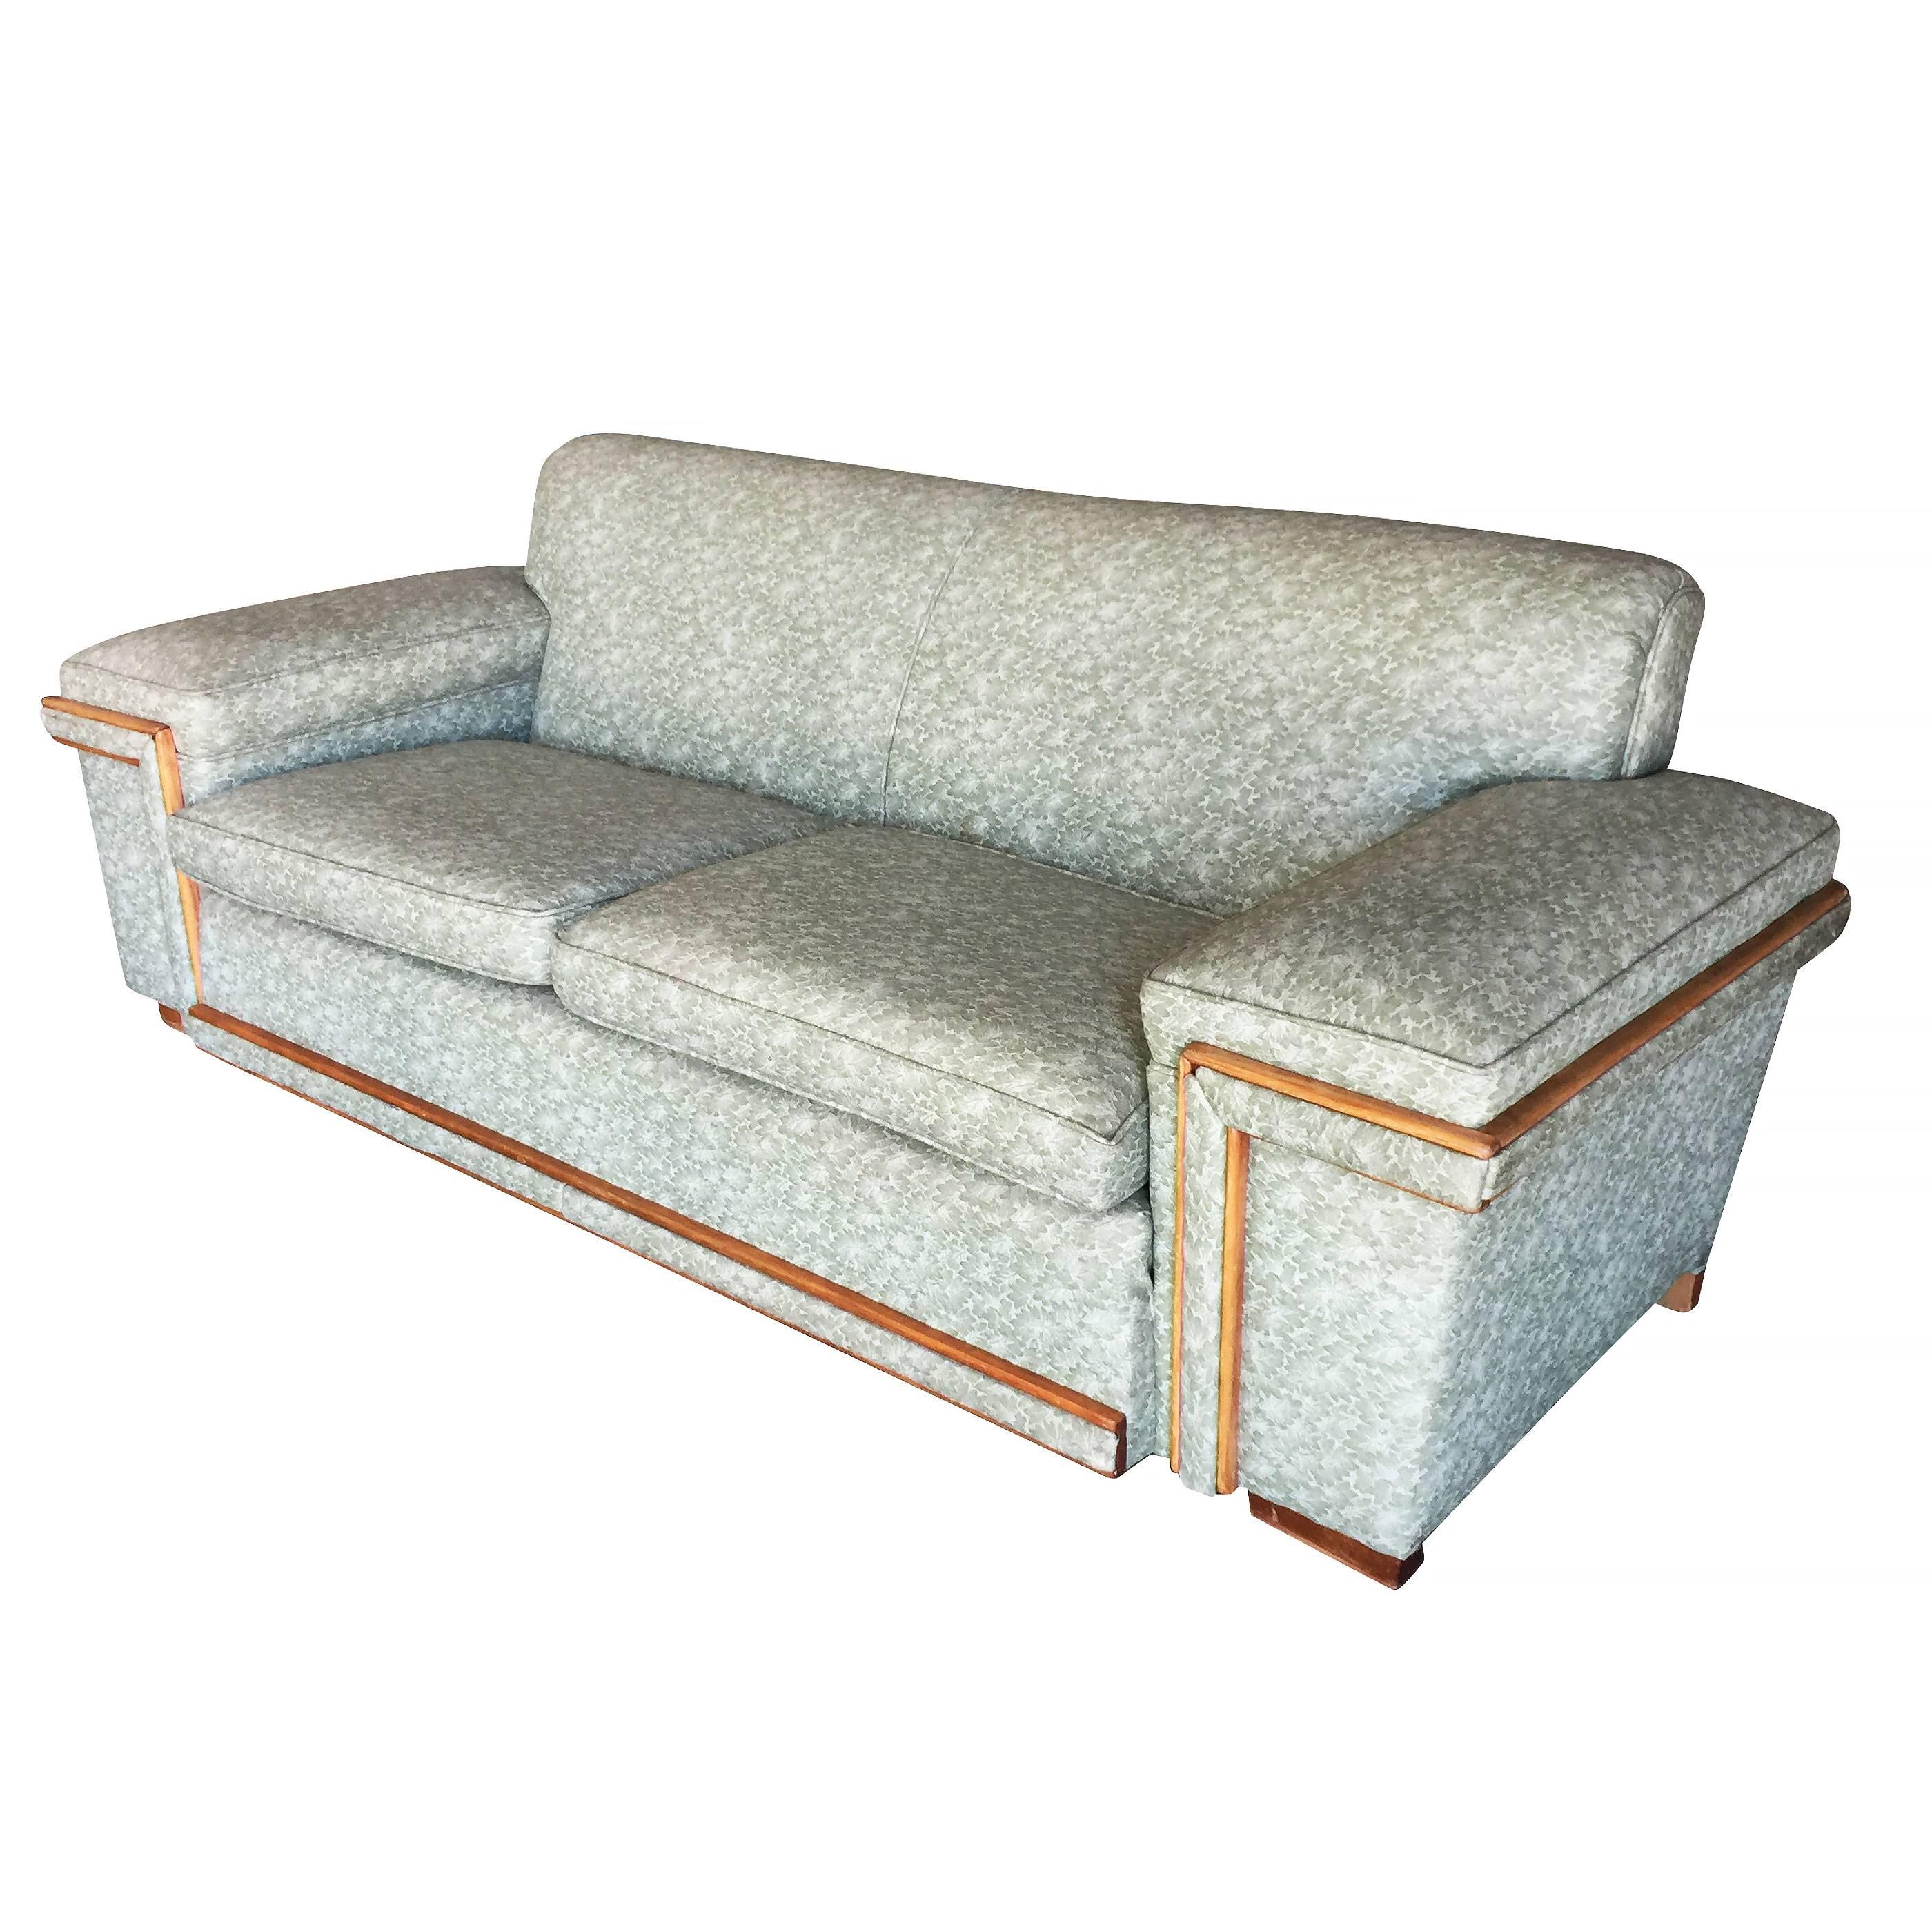 American Midcentury Sofa in the Milo Baughman Style with Walnut Trim For Sale